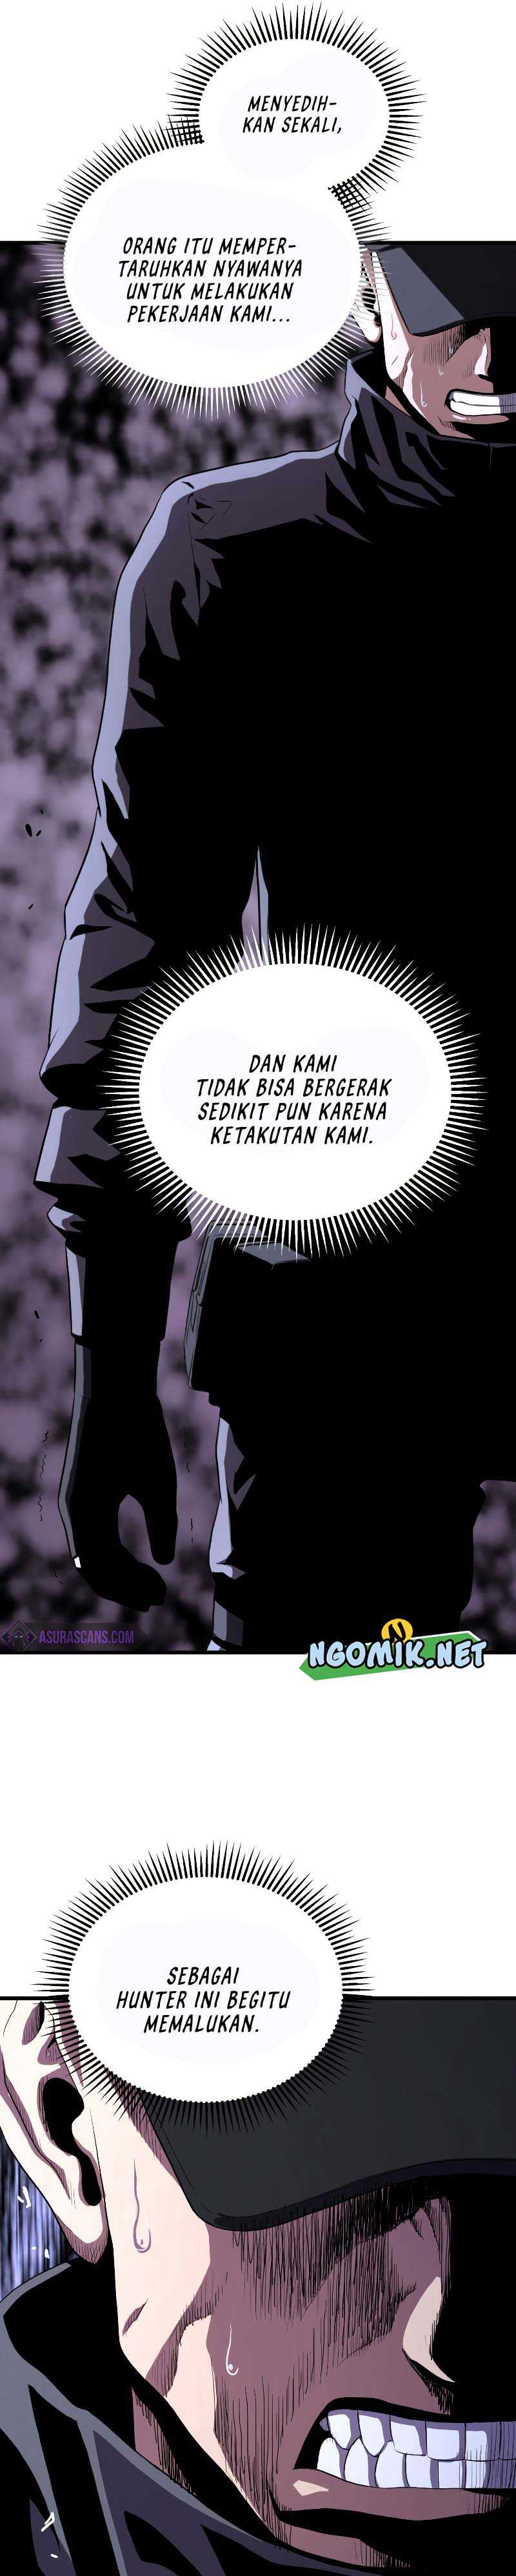 Hoarding in Hell Chapter 48